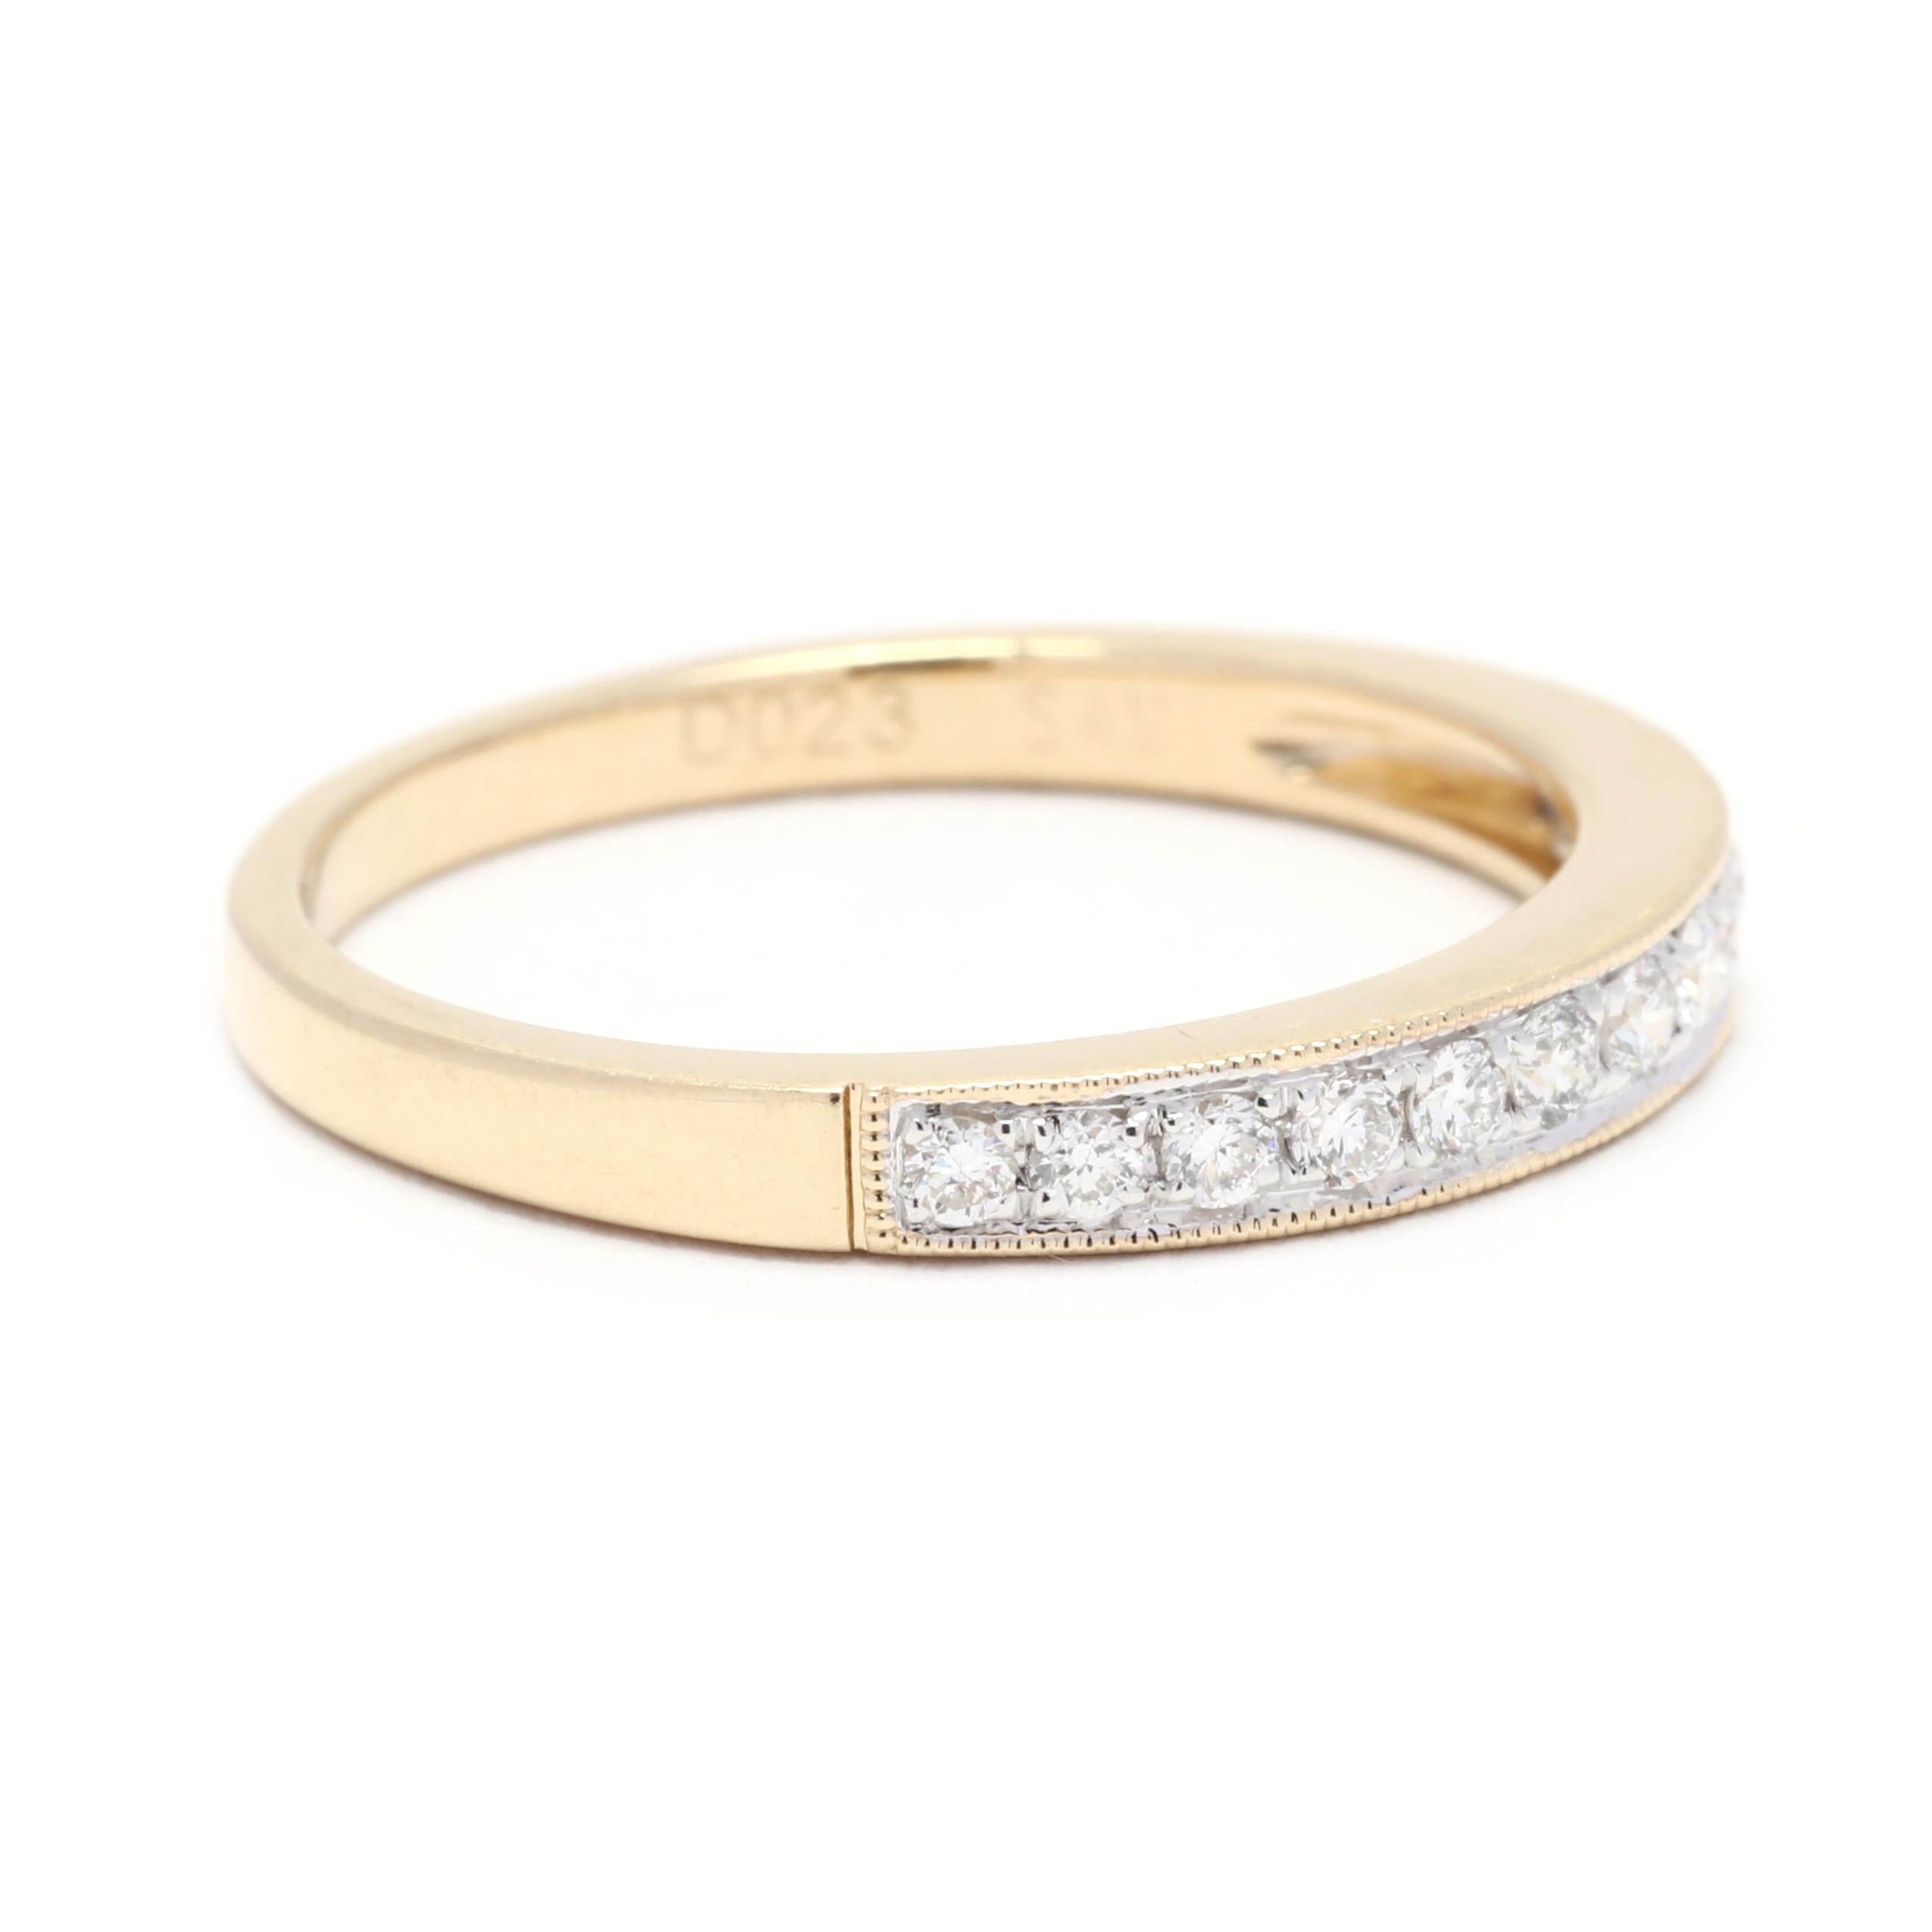 This delicate and beautiful diamond wedding band is the perfect addition to any stackable ring collection. Made with 14K yellow gold, this ring features a total of 0.23 carats of round cut diamonds. The diamonds are prong-set in a thin band,